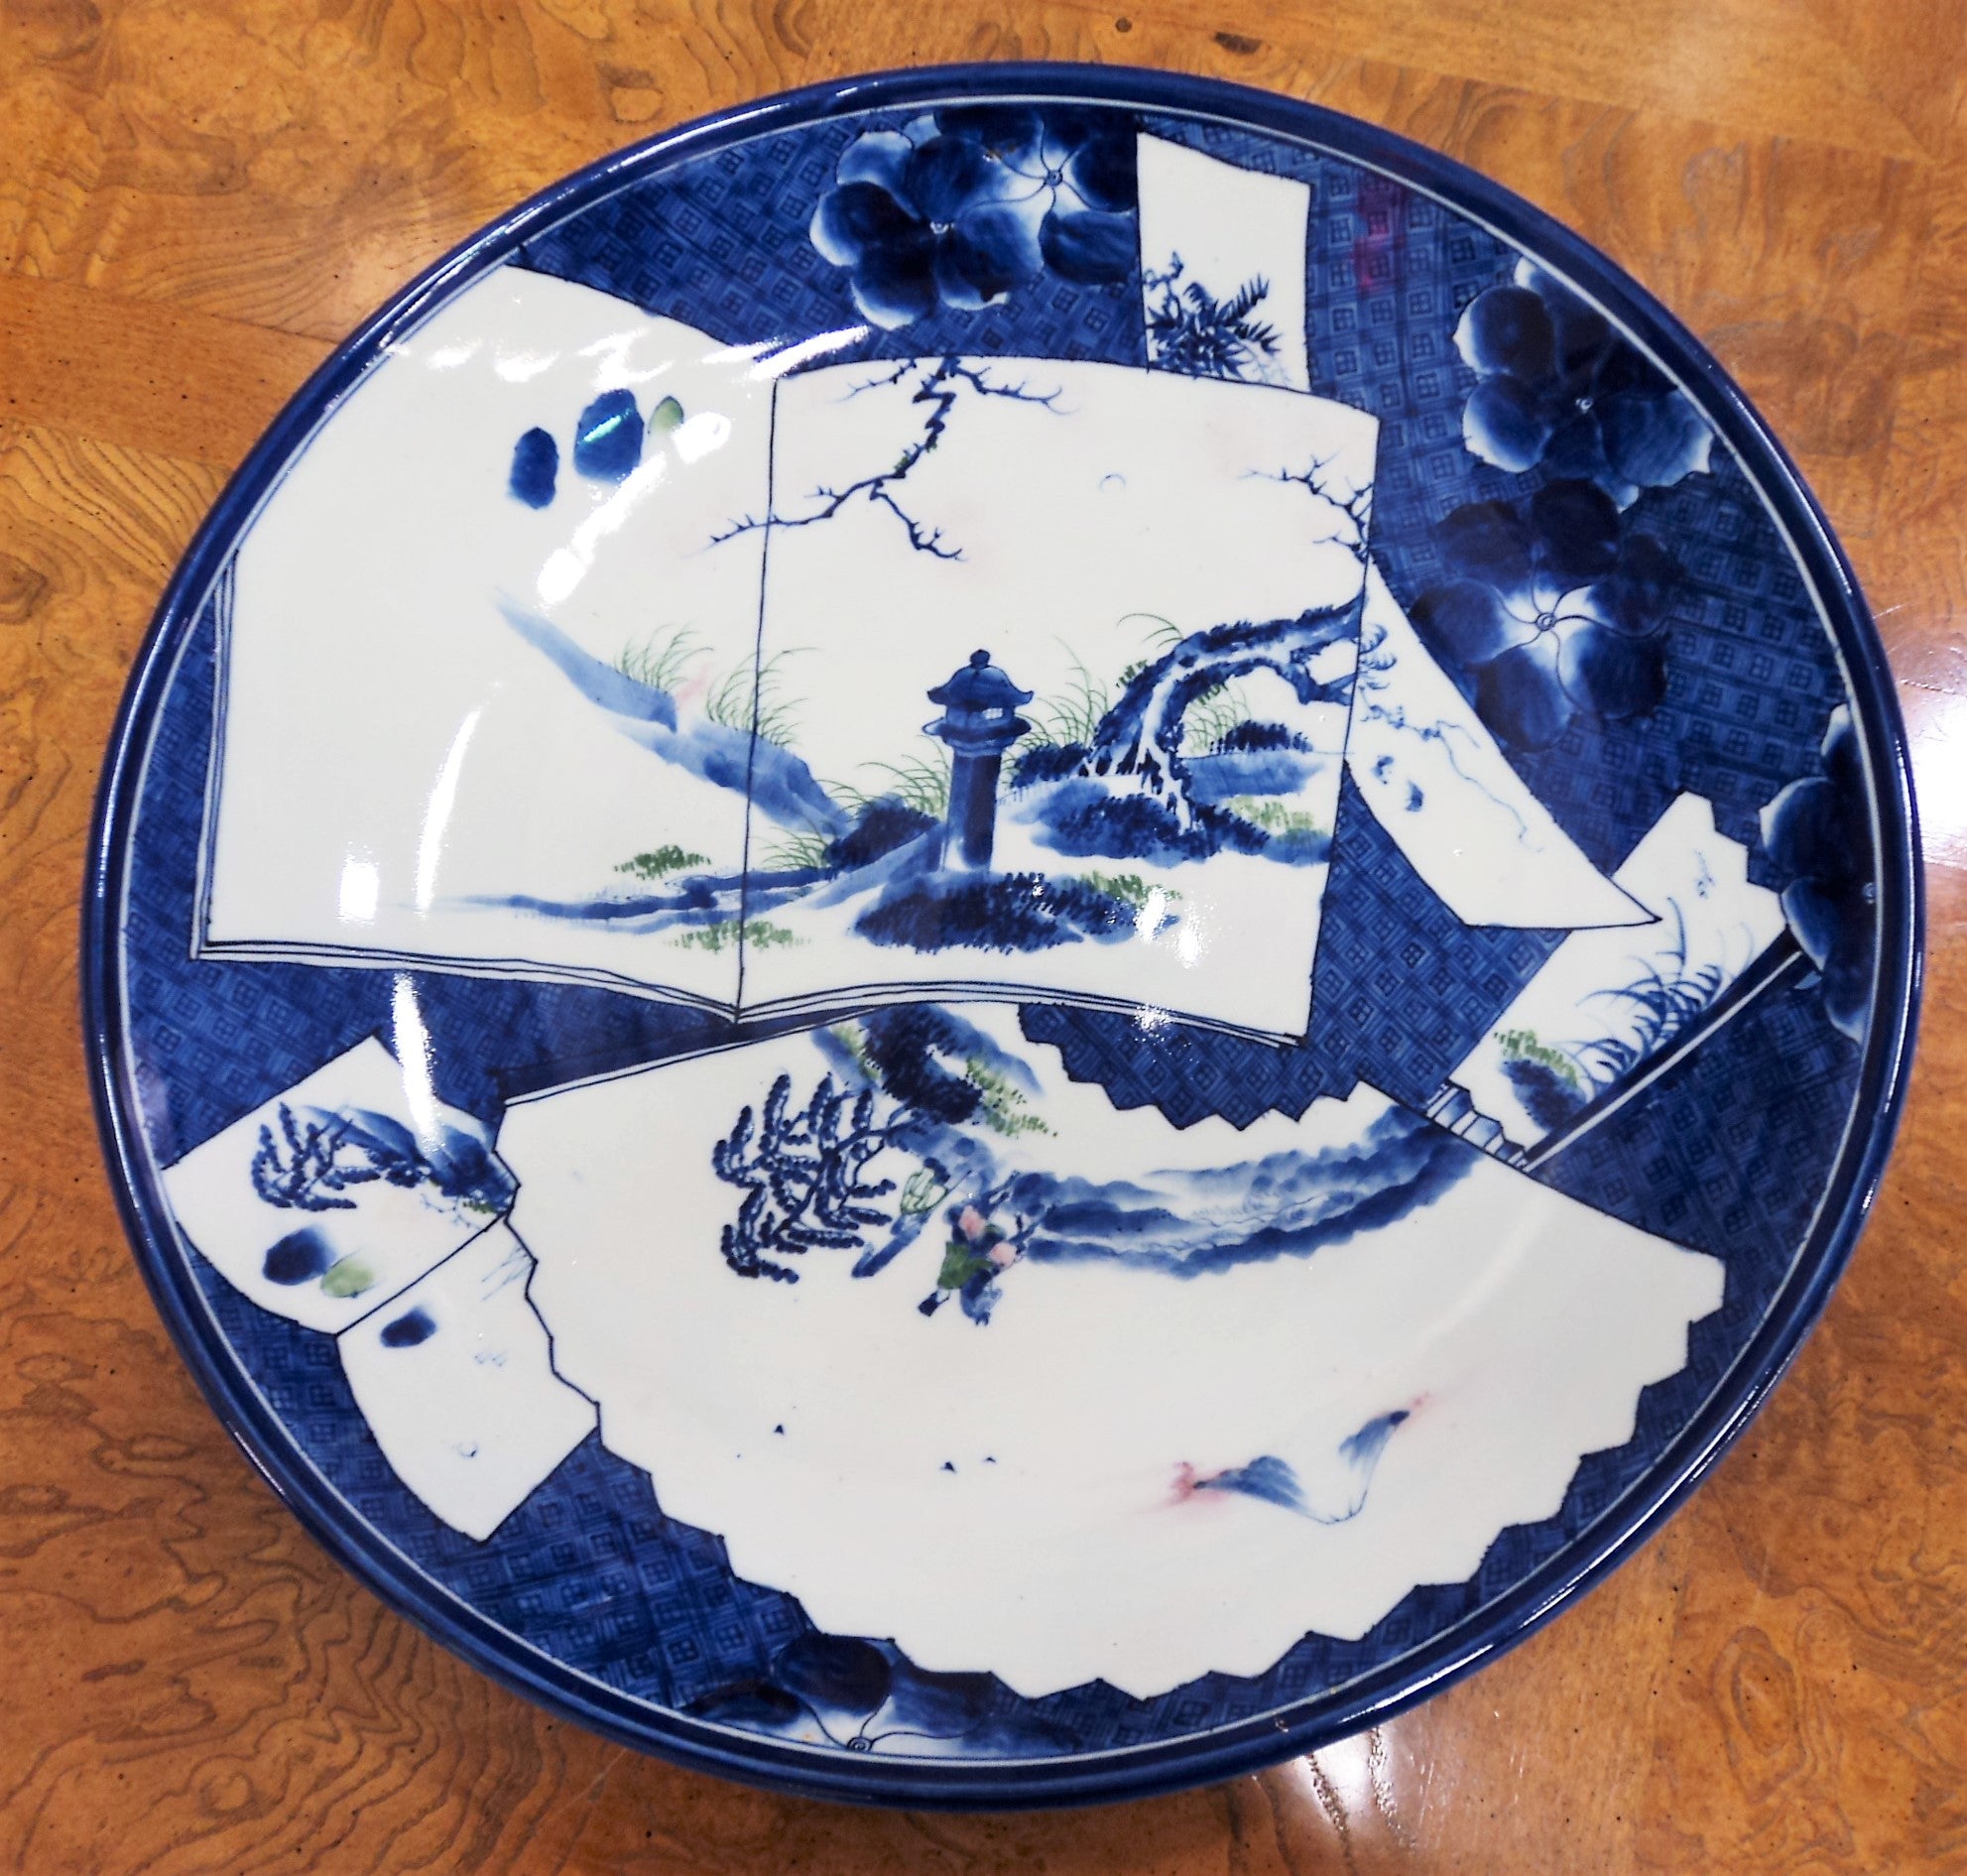 20th C. Japanese Porcelain Charger with Landscape